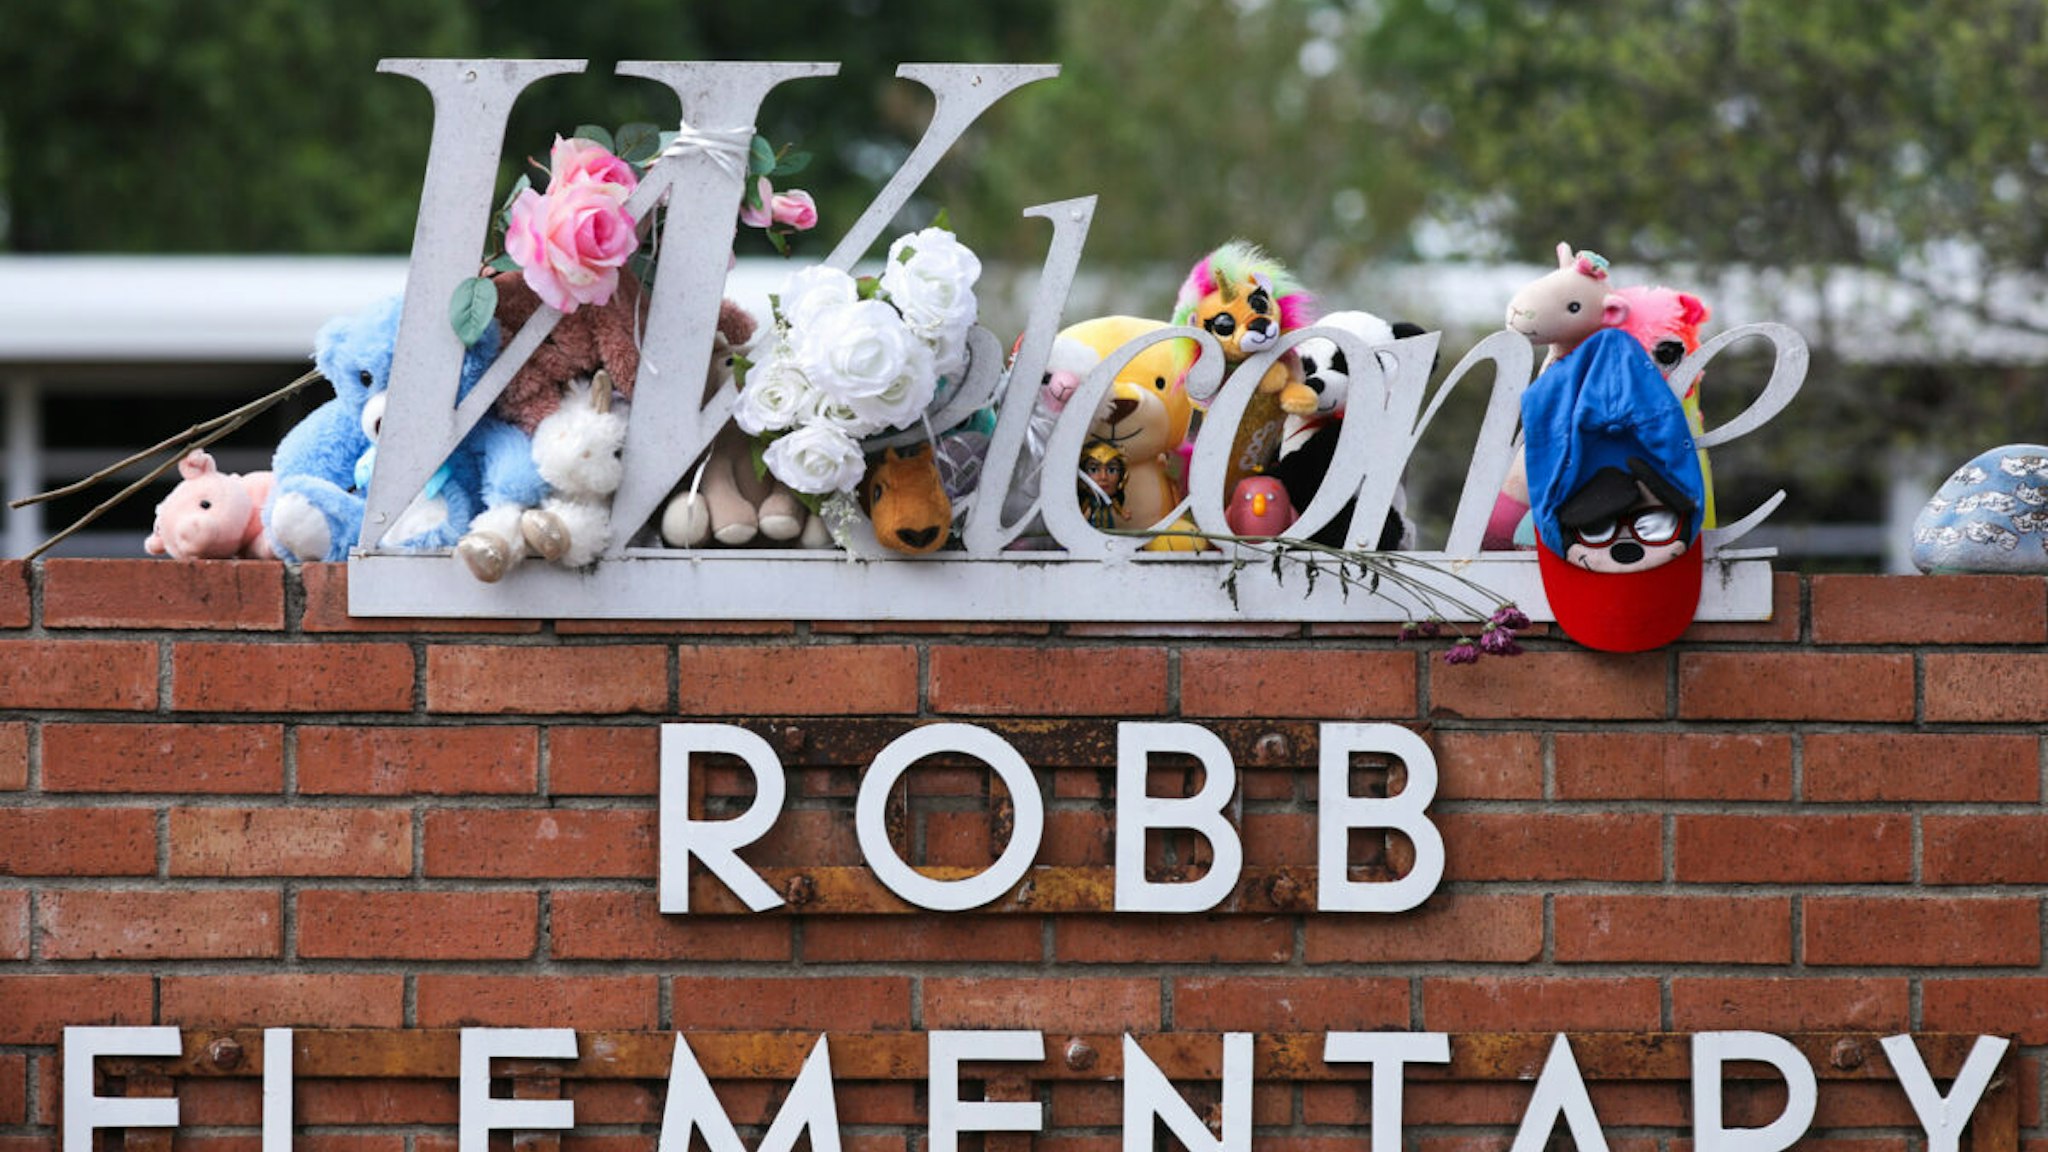 People visit a memorial for the 19 children and two adults killed on May 24th during a mass shooting at Robb Elementary School on May 30, 2022 in Uvalde, Texas